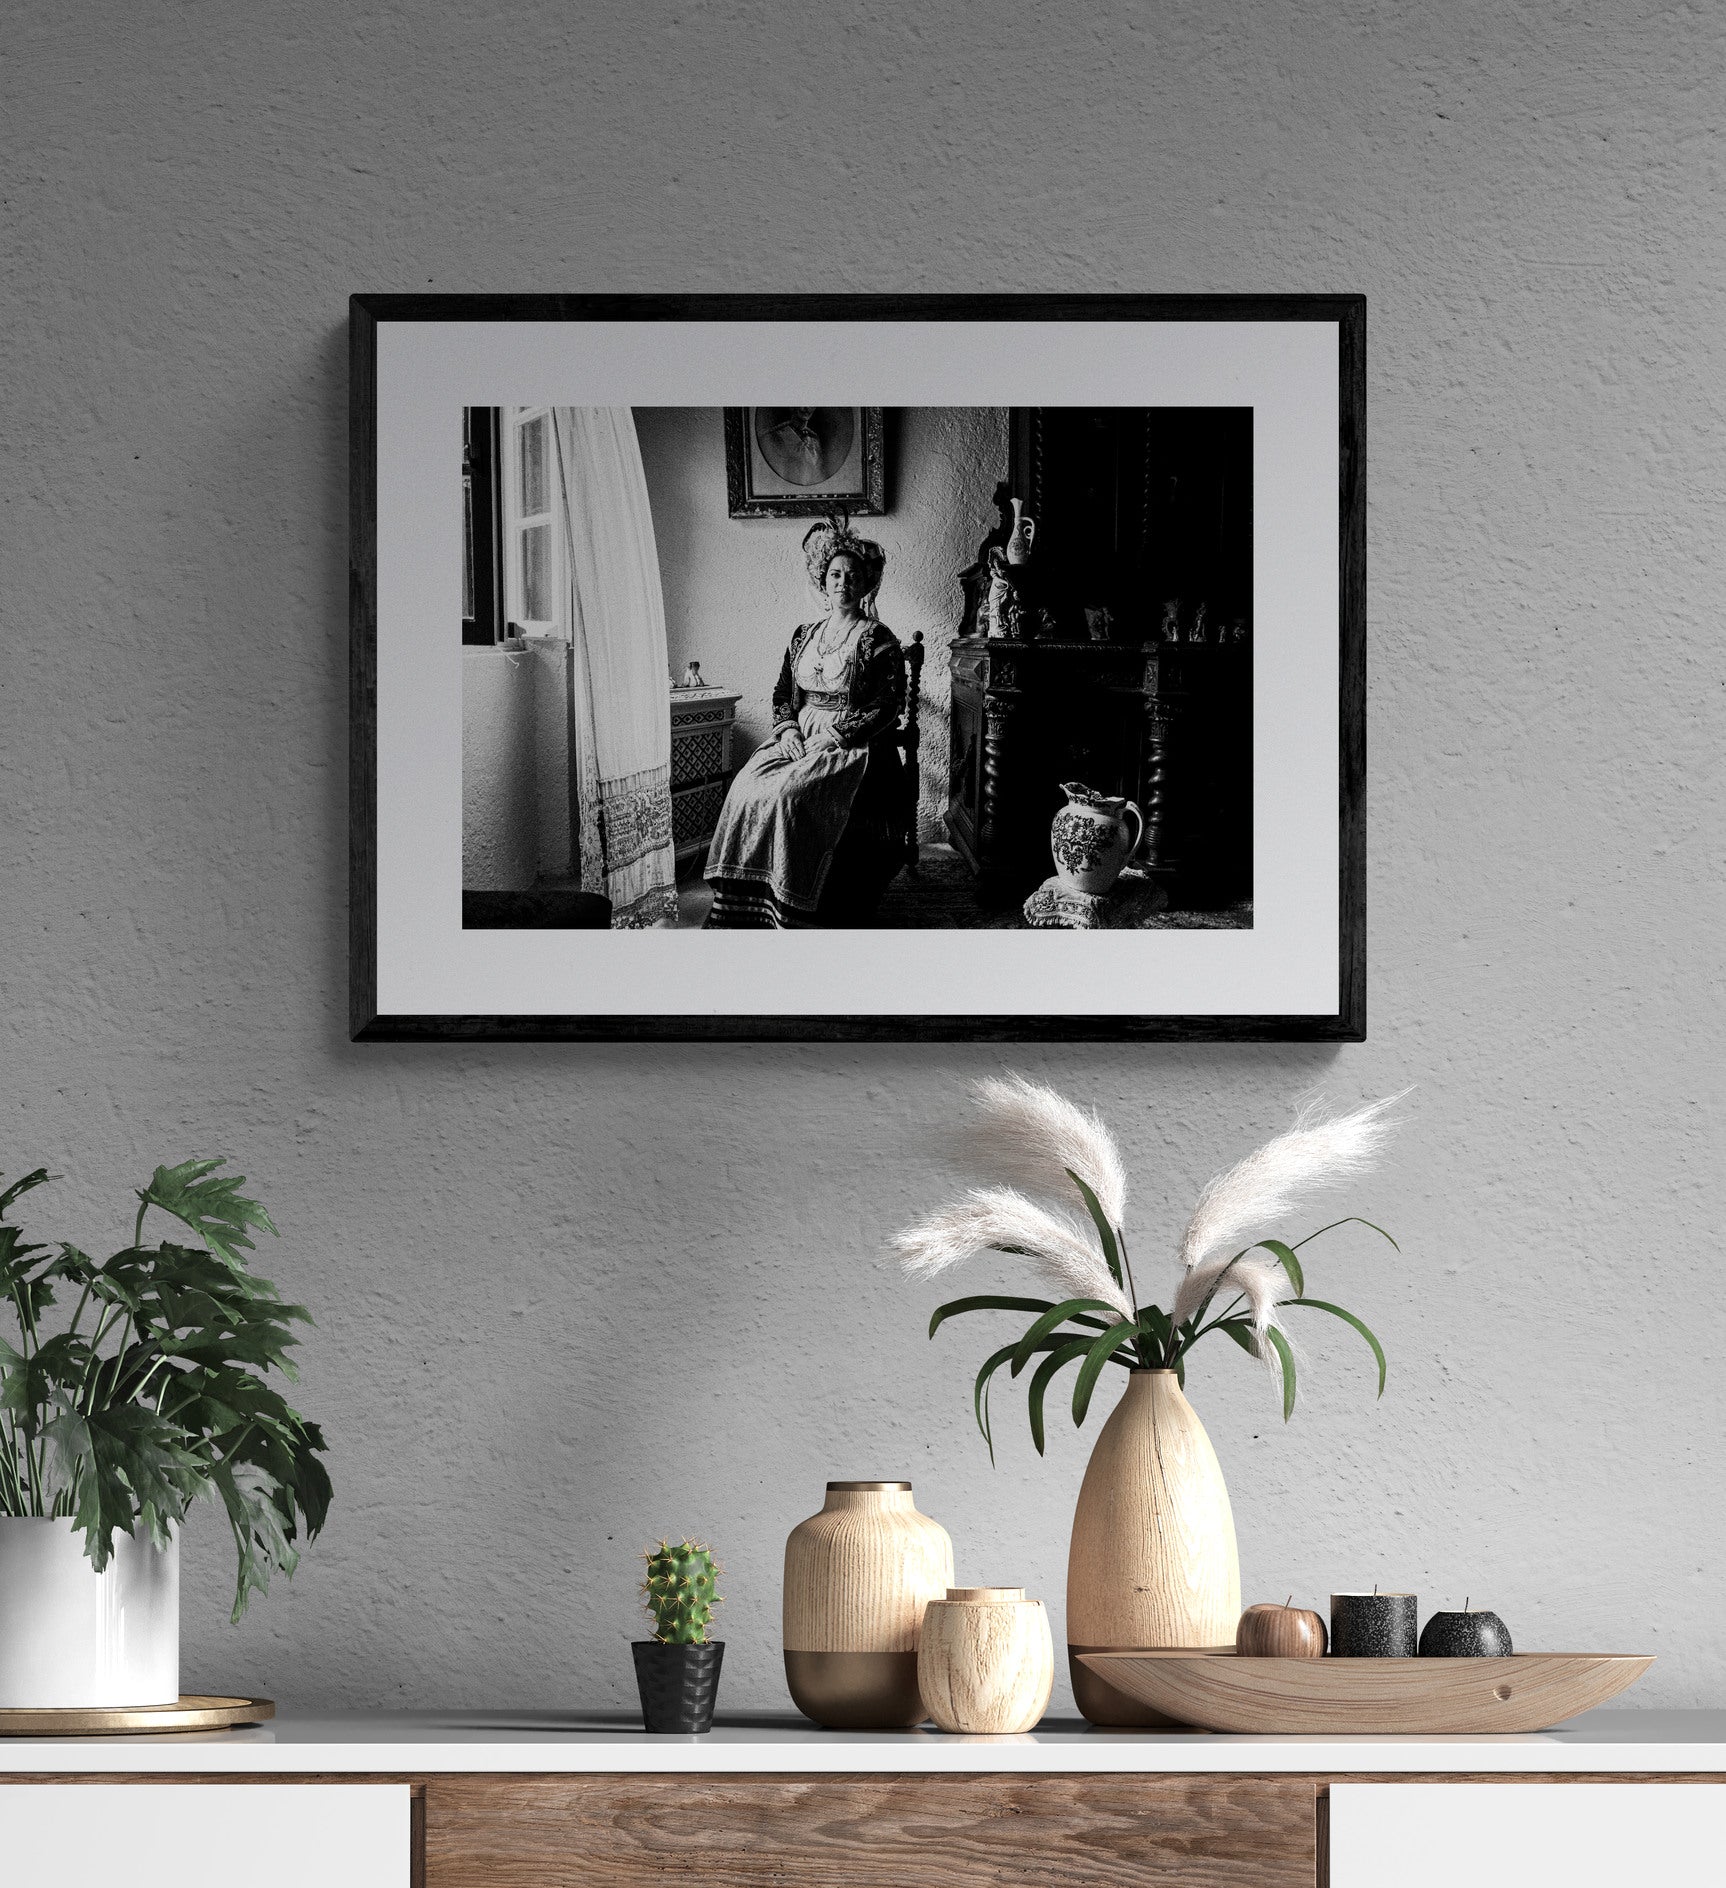 Black and White Photography Wall Art Greece | Costume of central Corfu island in a traditional home Ionian Sea by George Tatakis - single framed photo